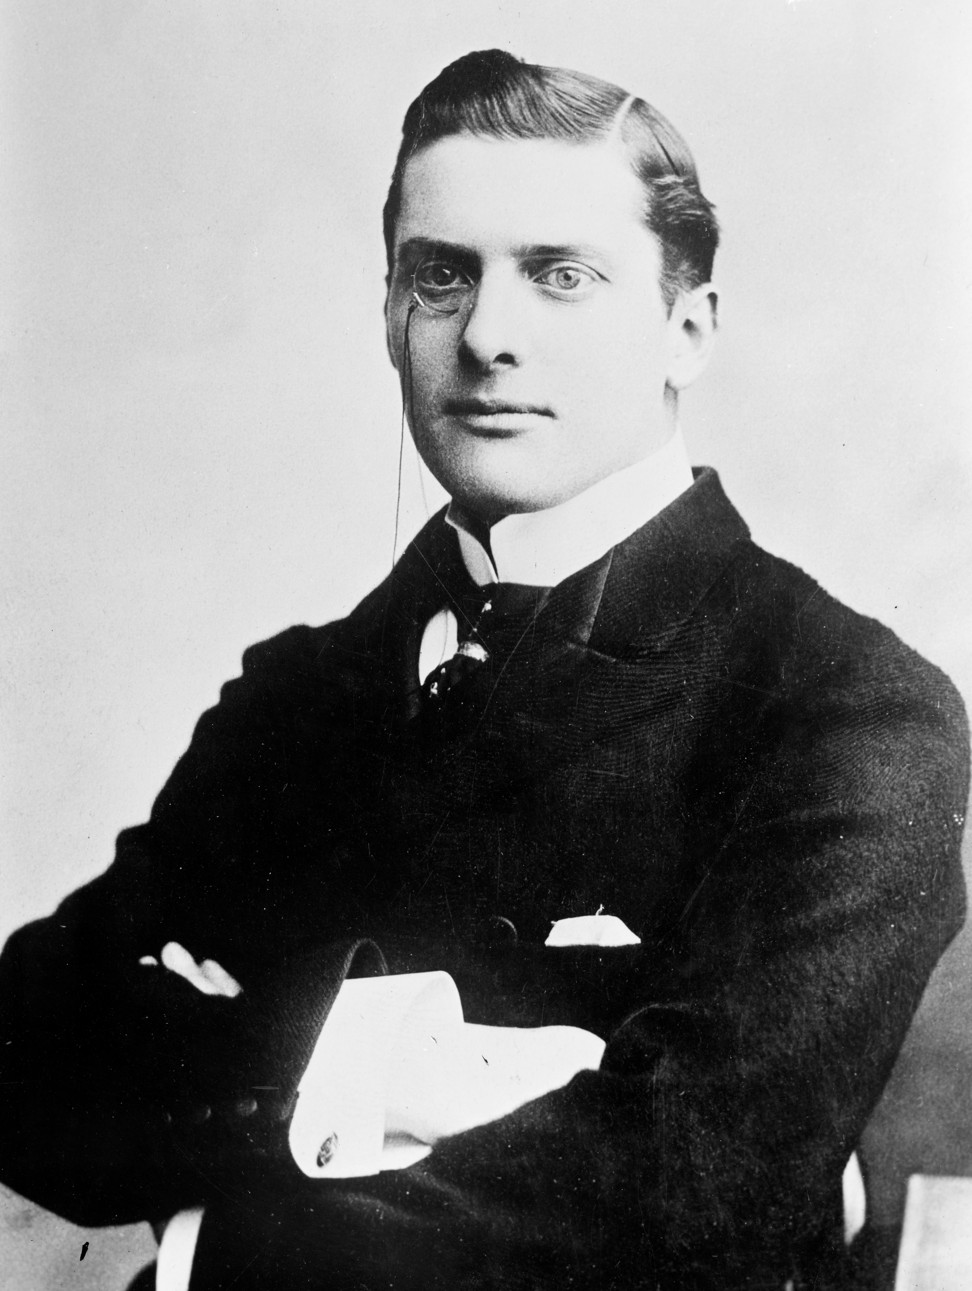 Austen Chamberlain was apparently the first public figure to utter the phrase “May you live in interesting times” and present it as an ancient Chinese curse. Photo: Alamy